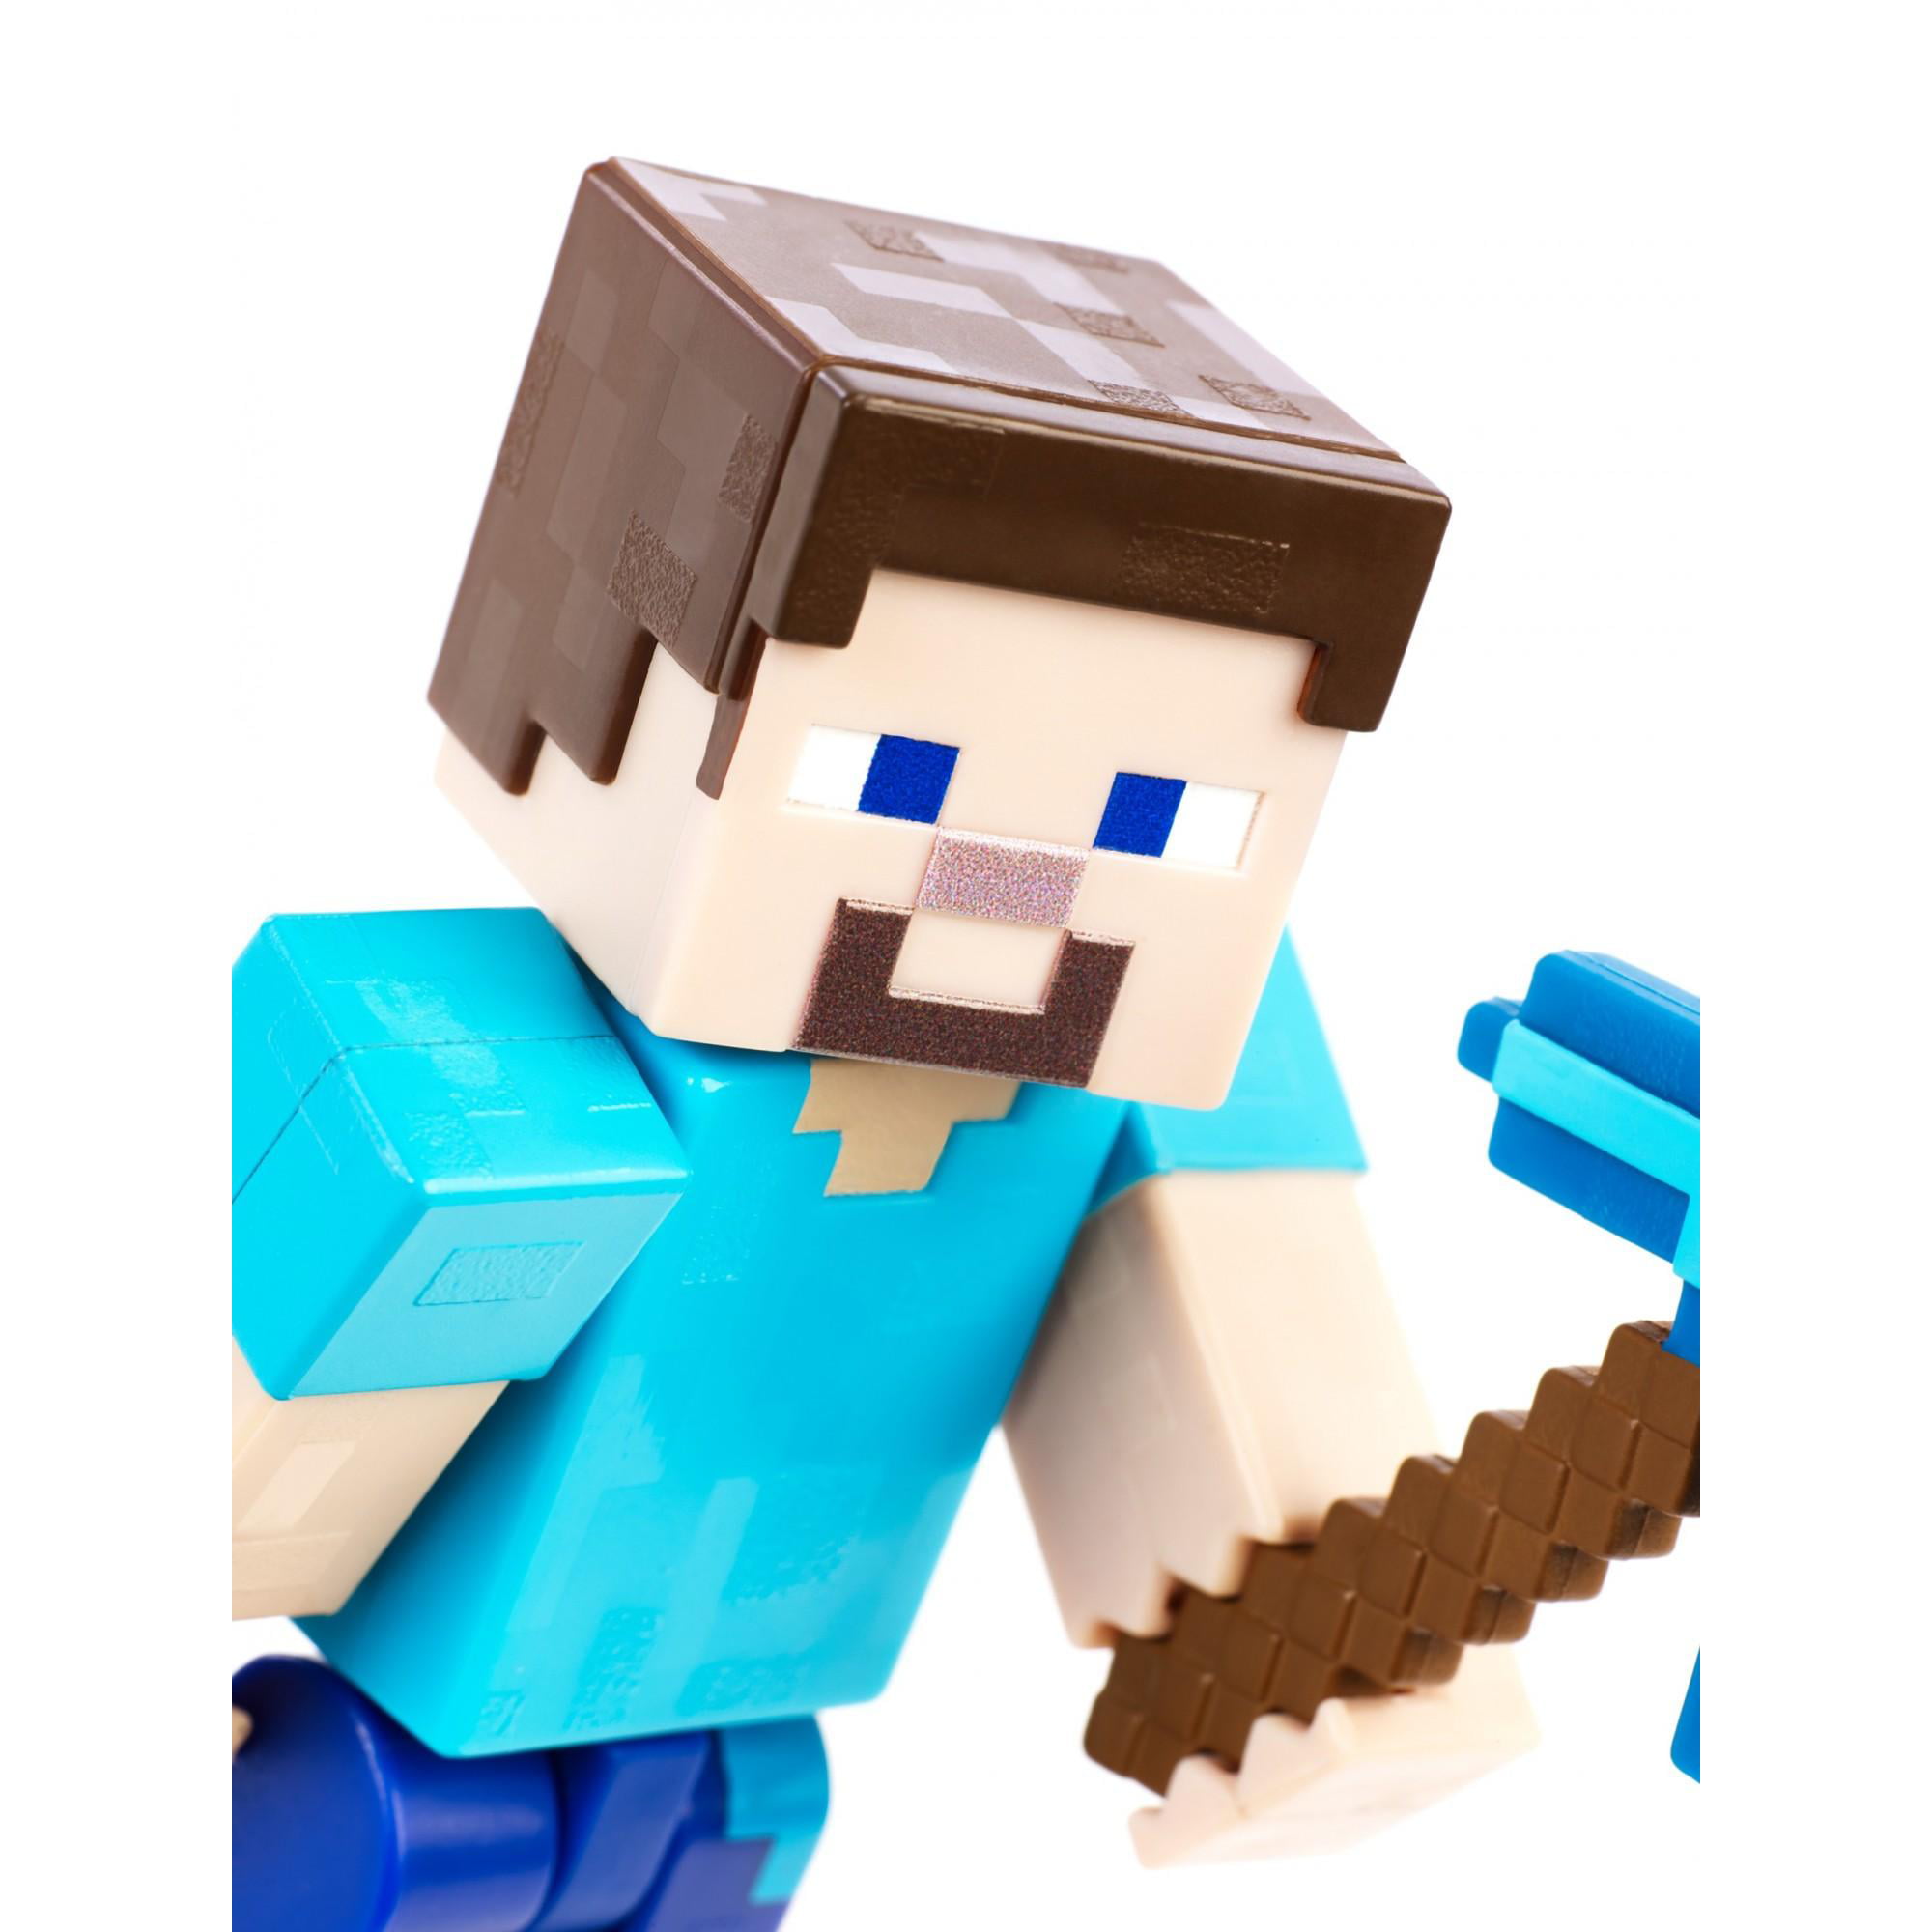 Minecraft Comic Maker Blaze Action Figure with 2 Faces 